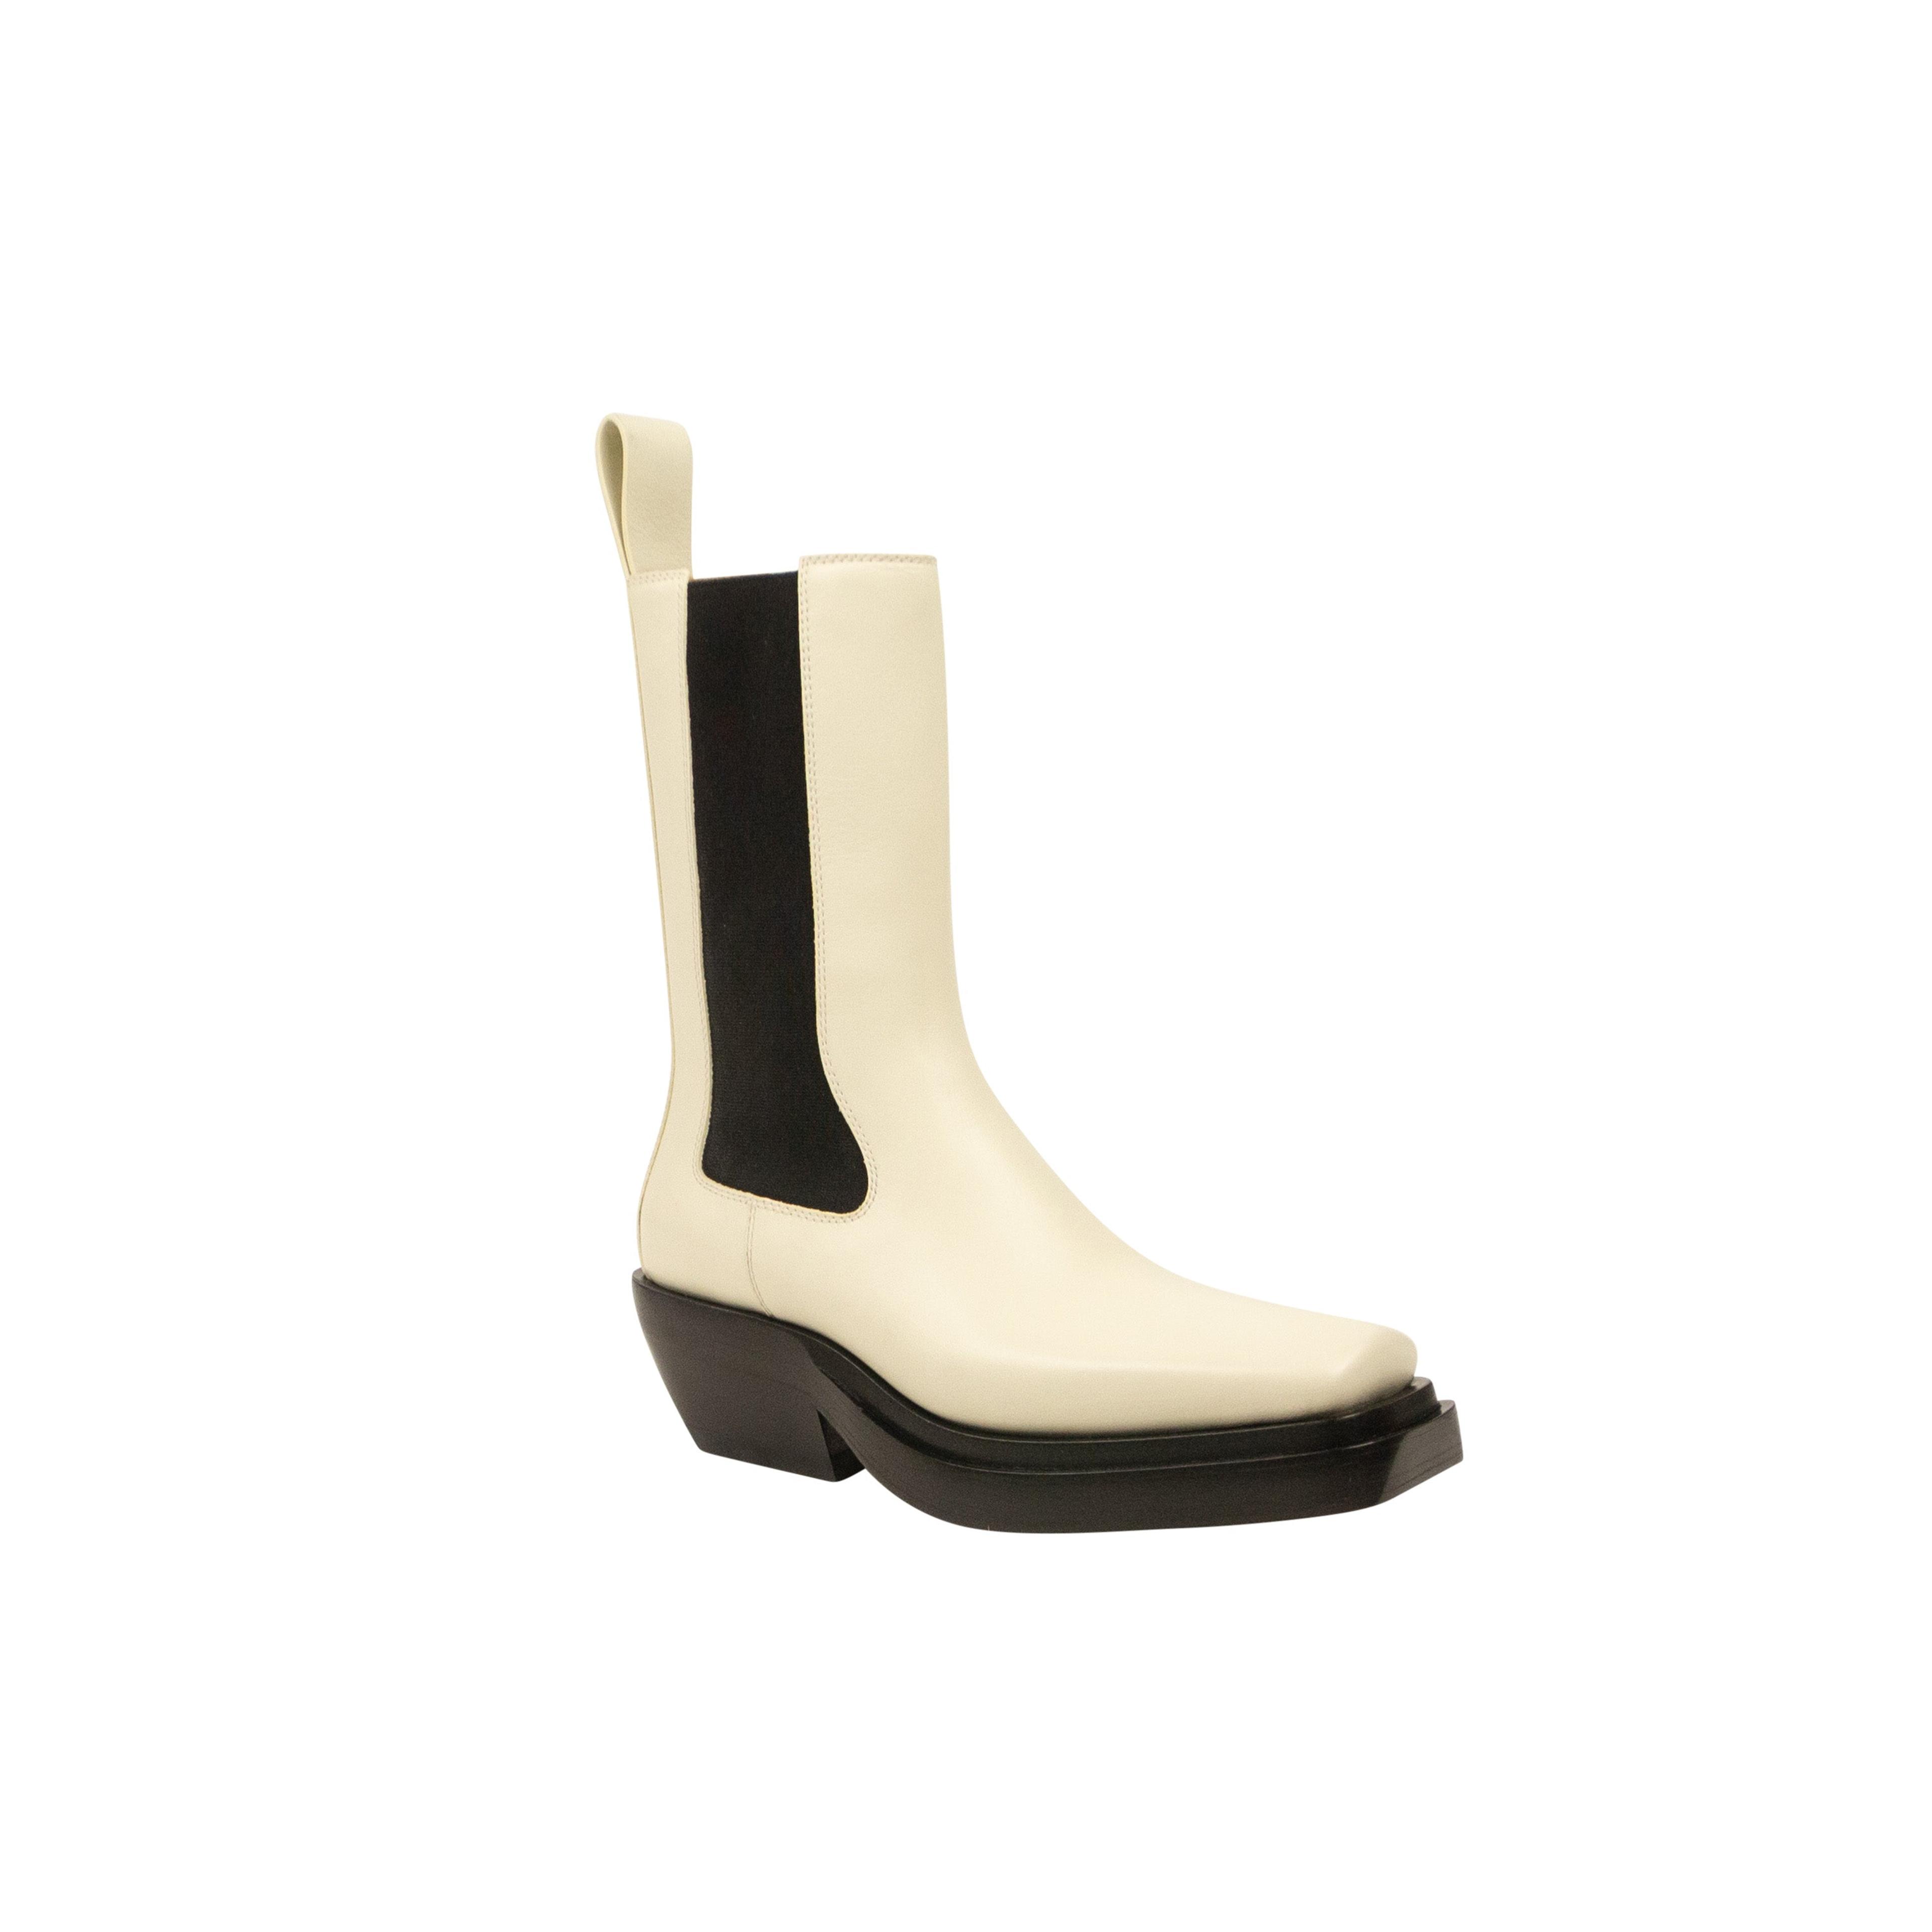 Alternate View 1 of Ivory Lean Heeled Chelsea Boots